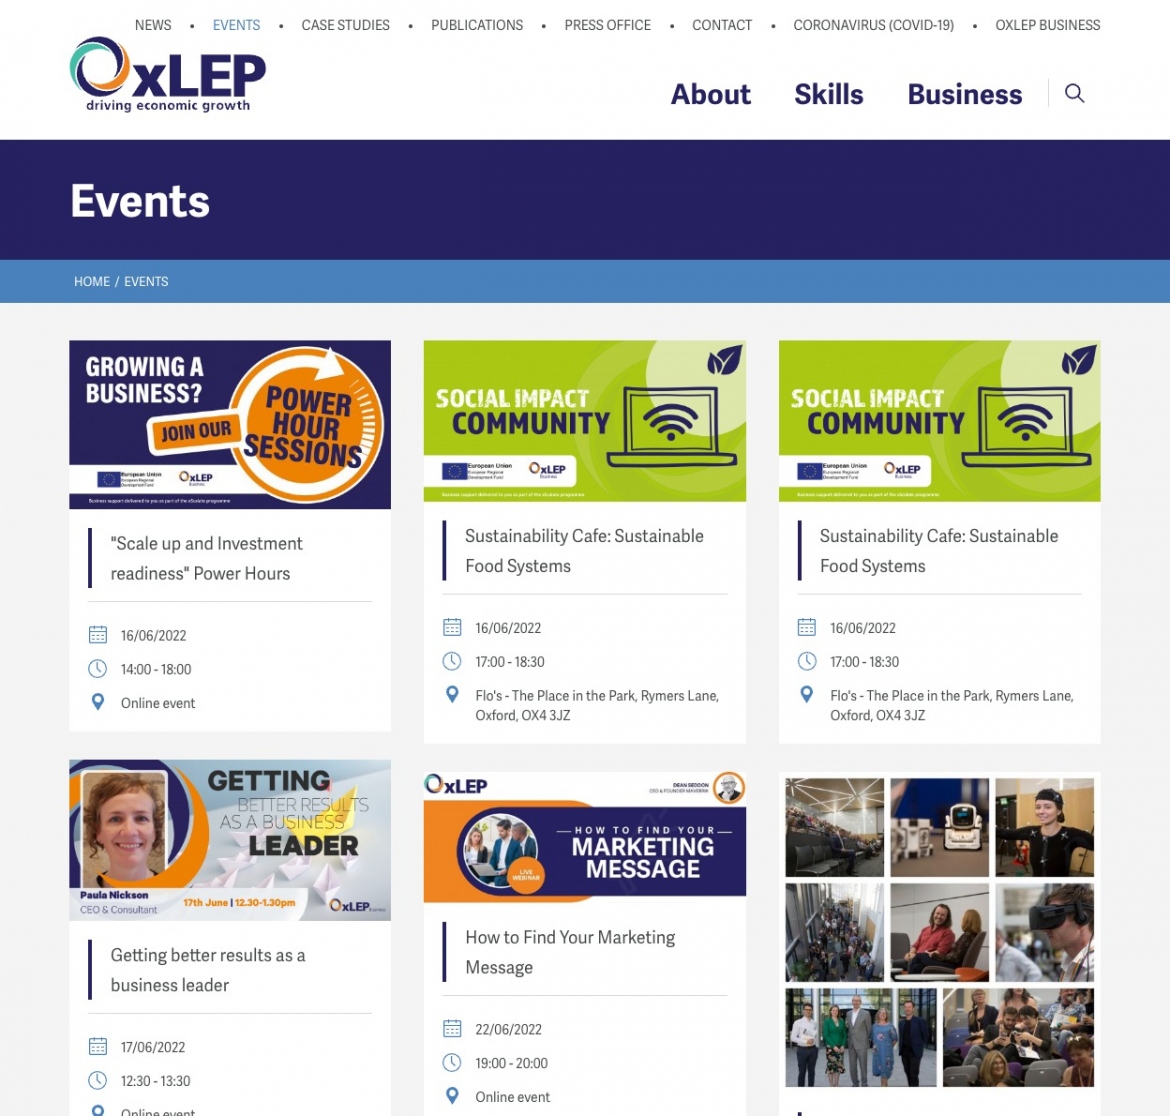 OxLEP website screenshot of events section